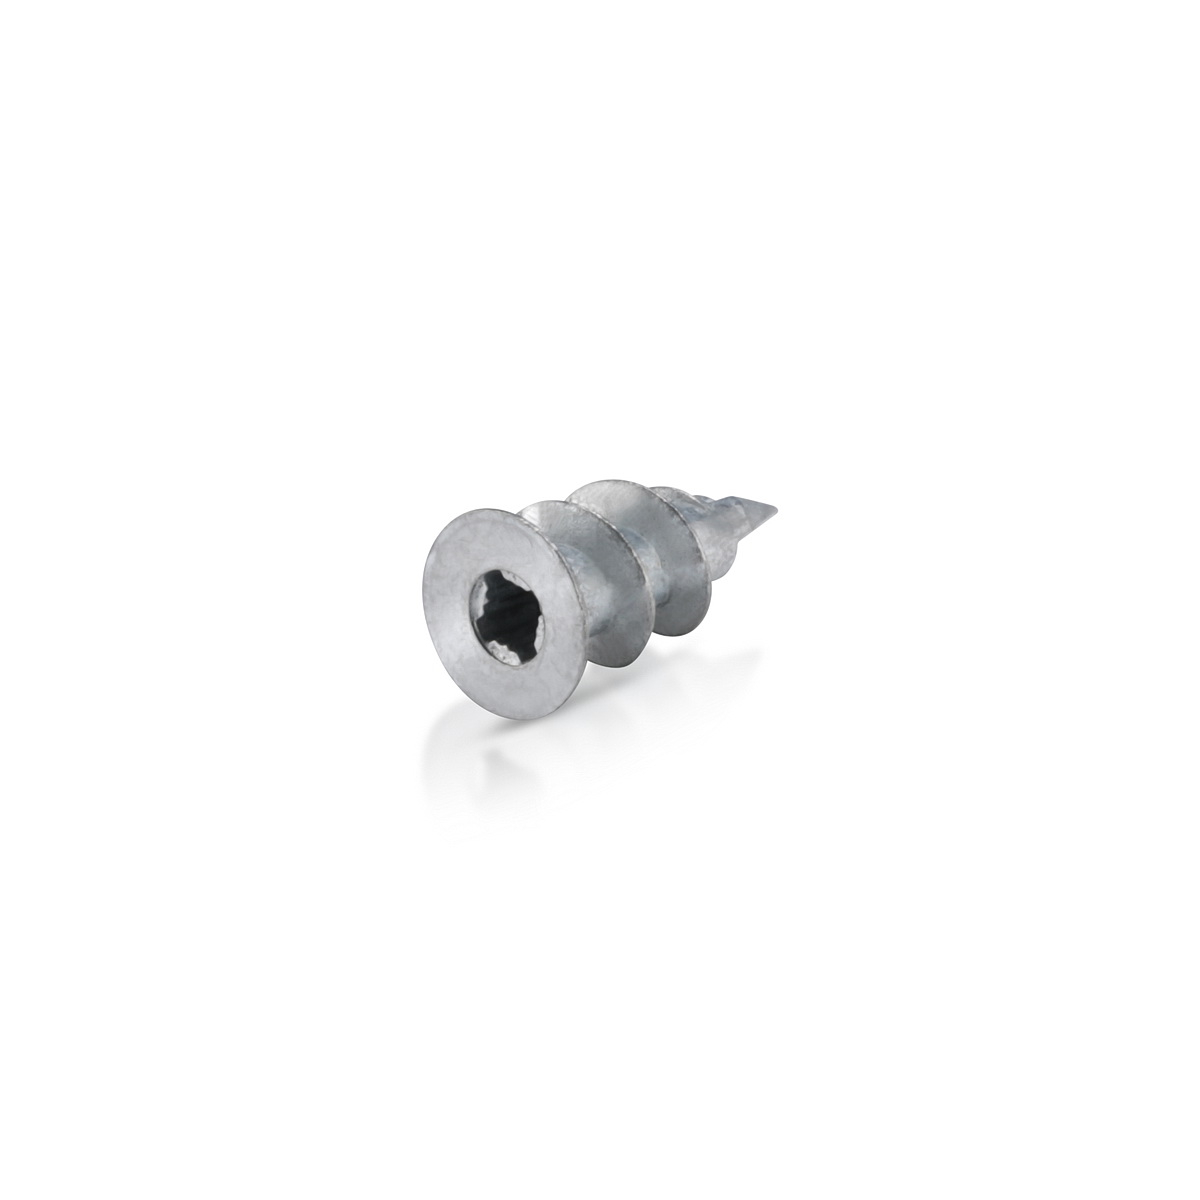 Cost Effective Small Zinc Speed Anchor for #8 Screw for Drywall